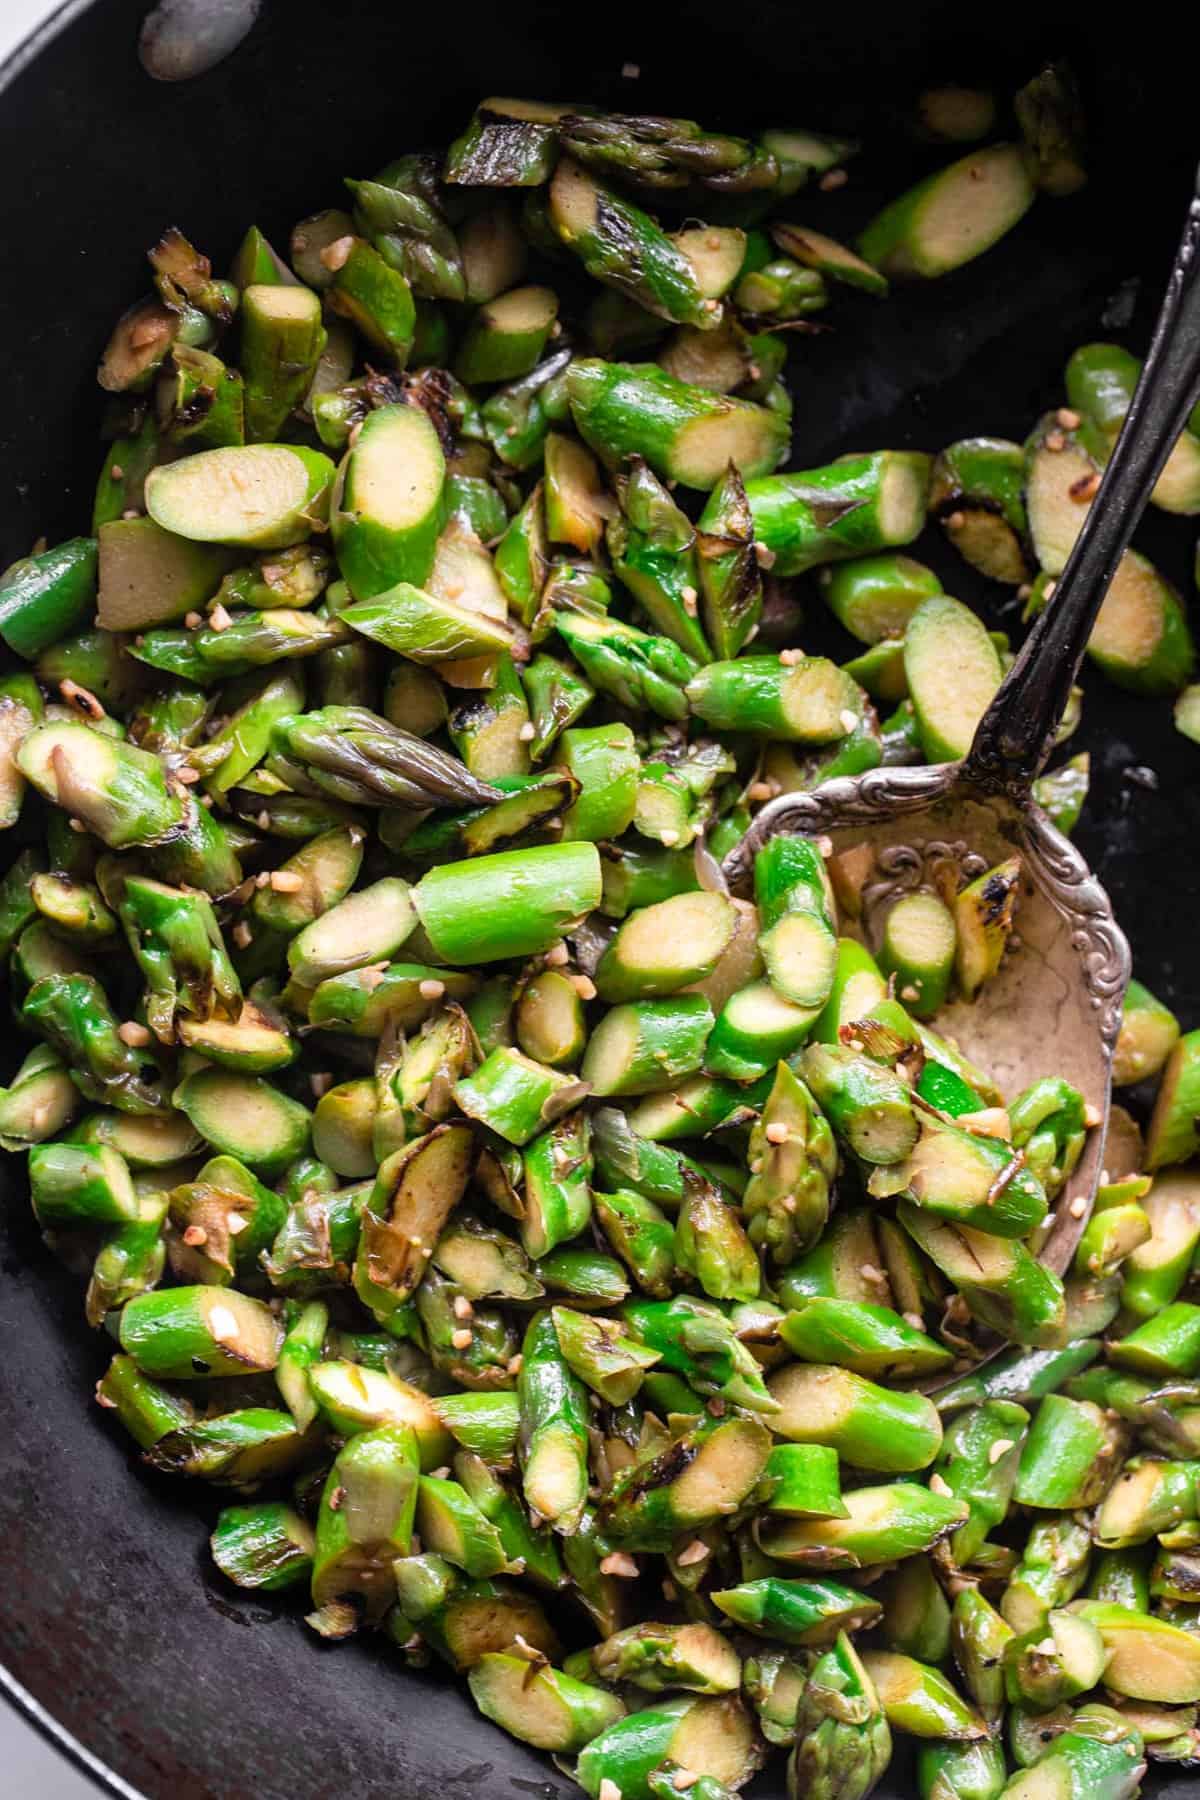 Asparagus Stir Fry In pan being cooked